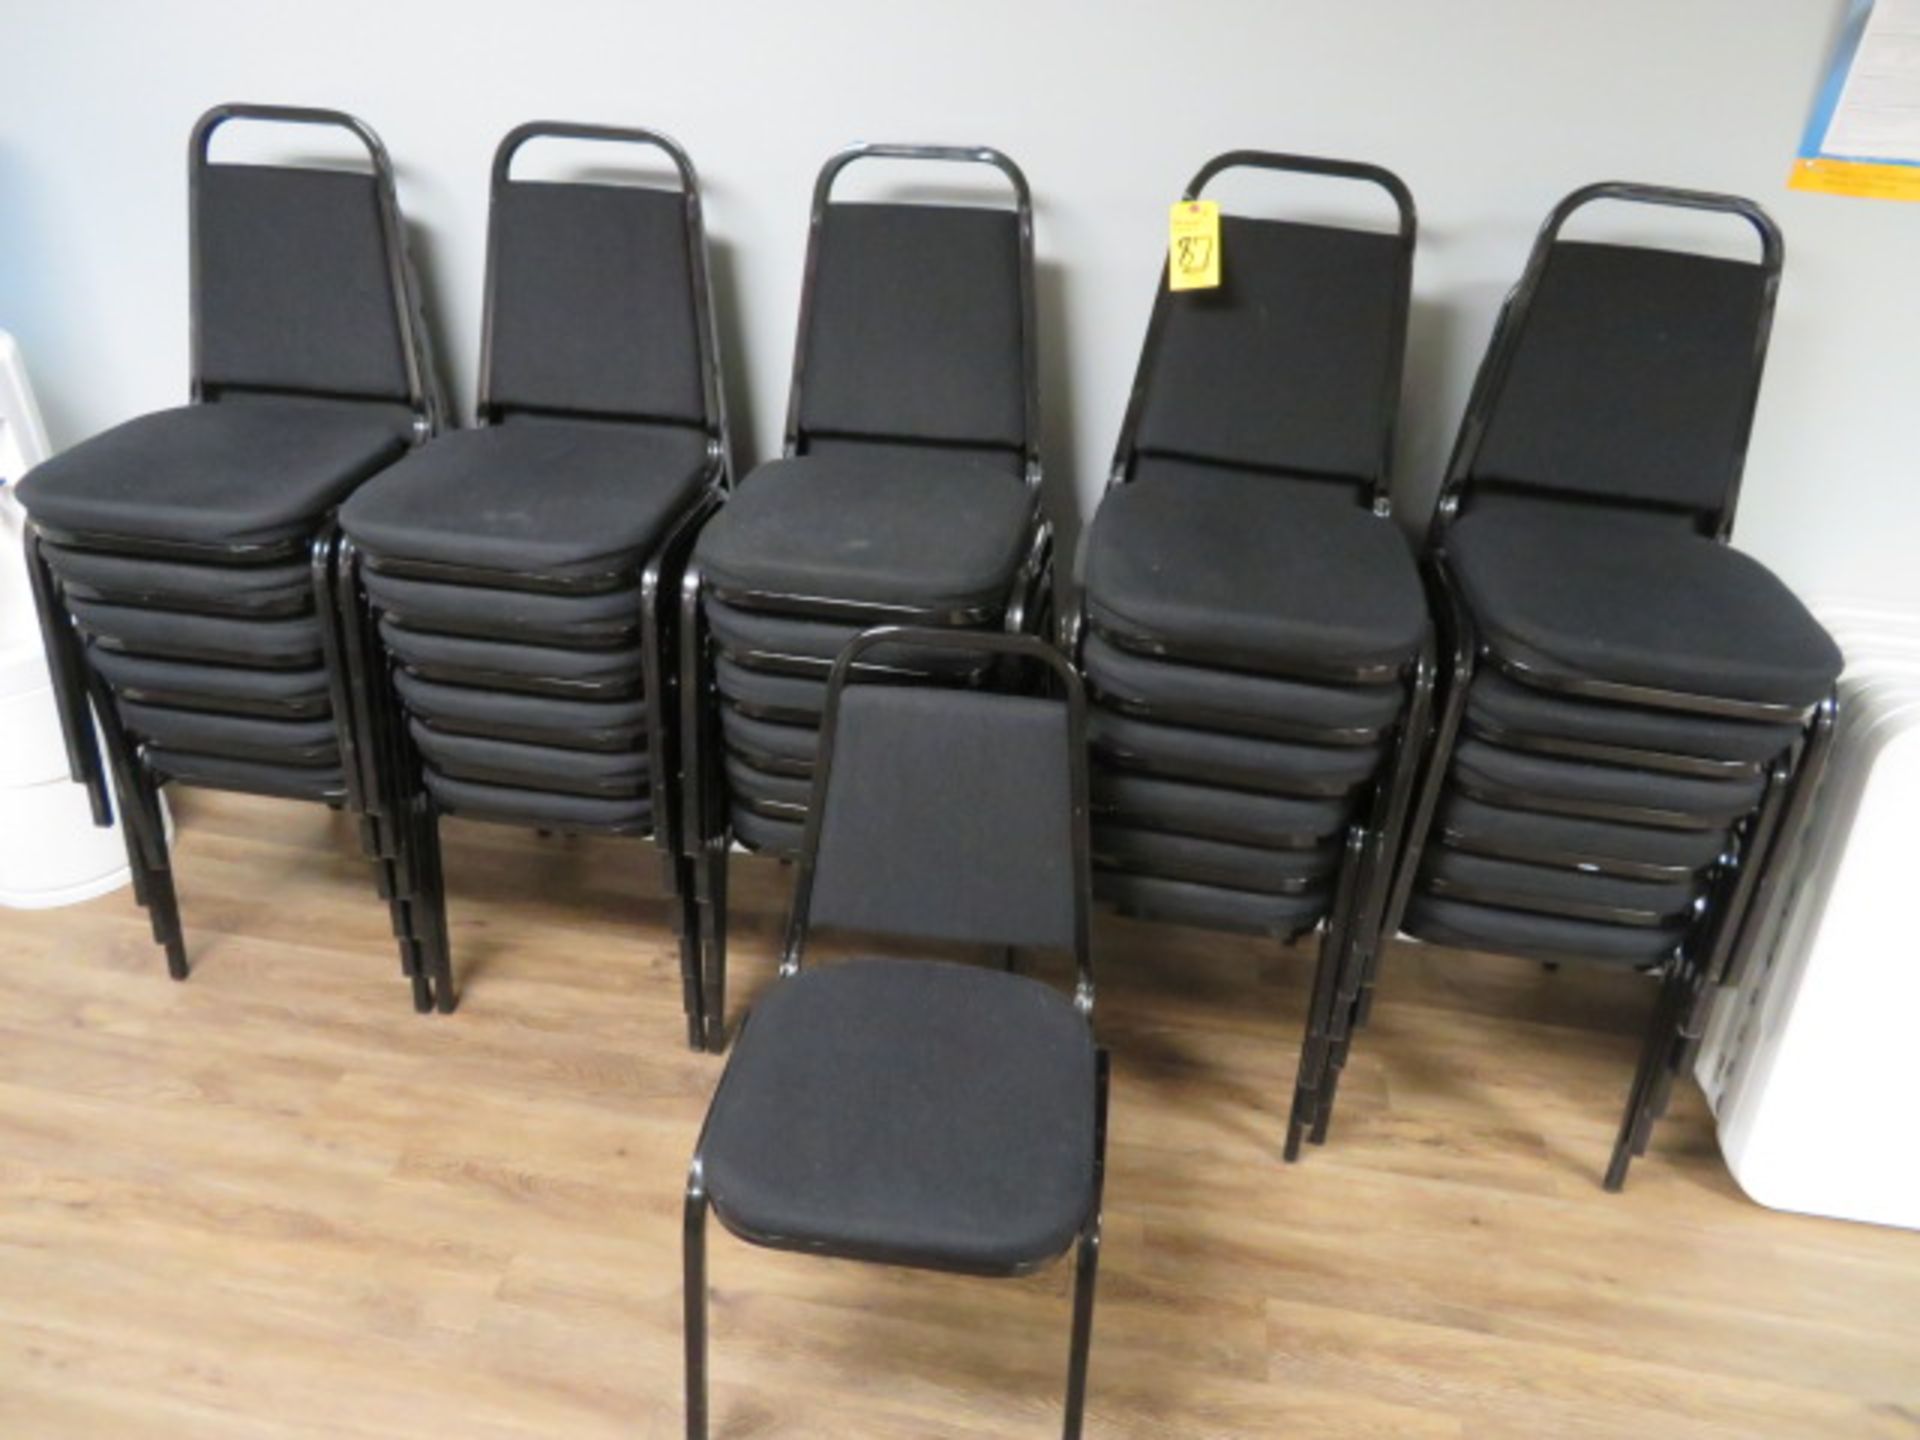 (31) UPHOLSTERED TUBE-FRAMED STACK CHAIRS (BALA CYNWYD, PA)